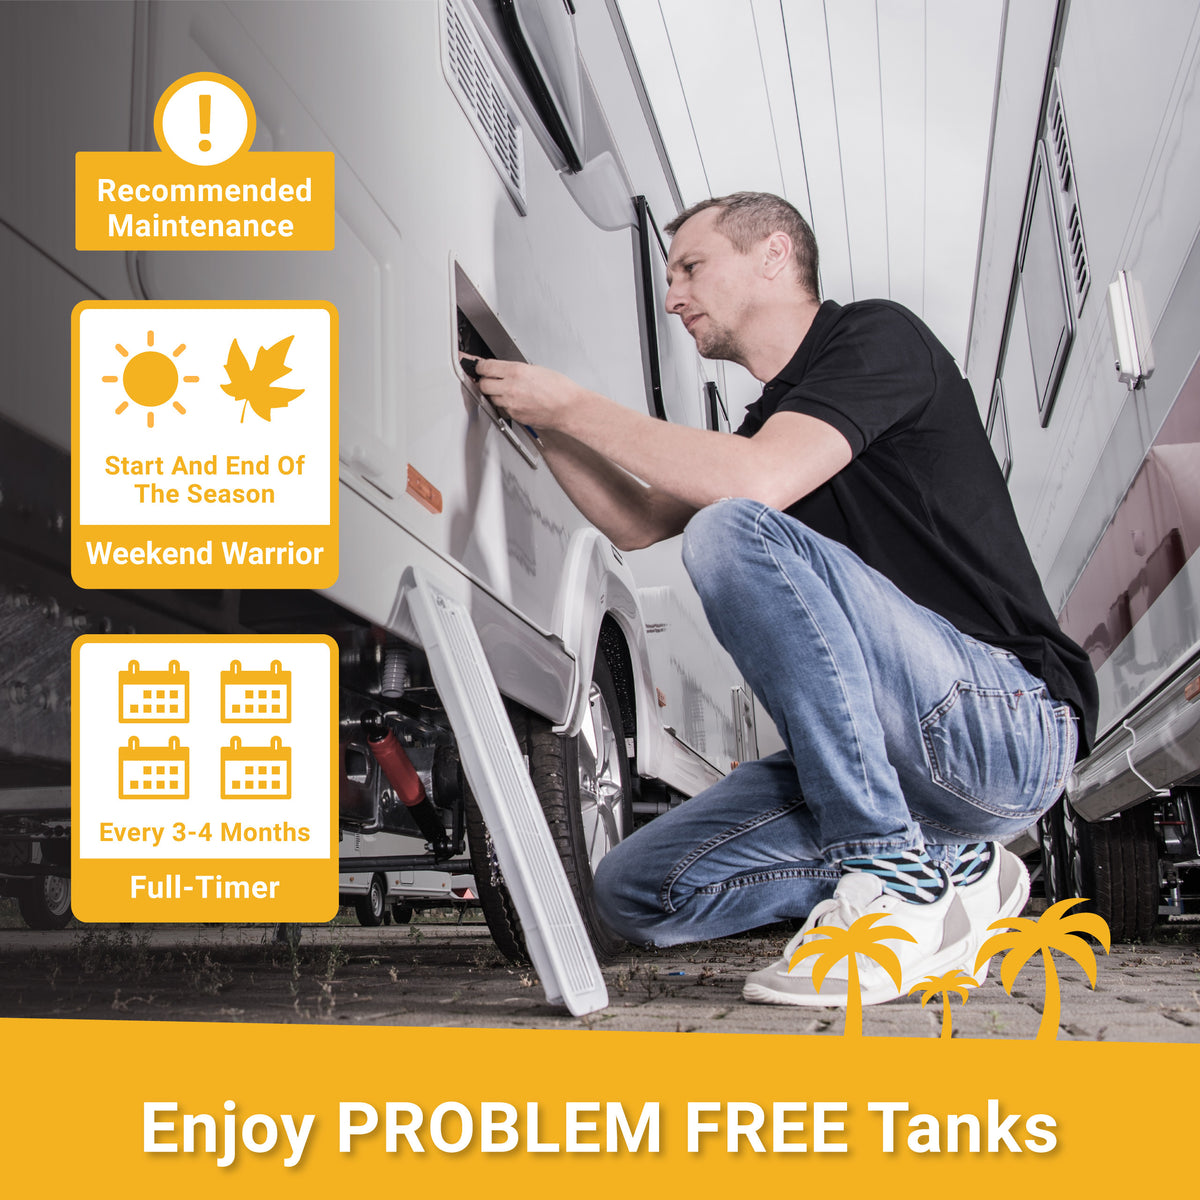 Enjoy problem free holding tanks by treating regularly during the season. Unique Camping + Marine